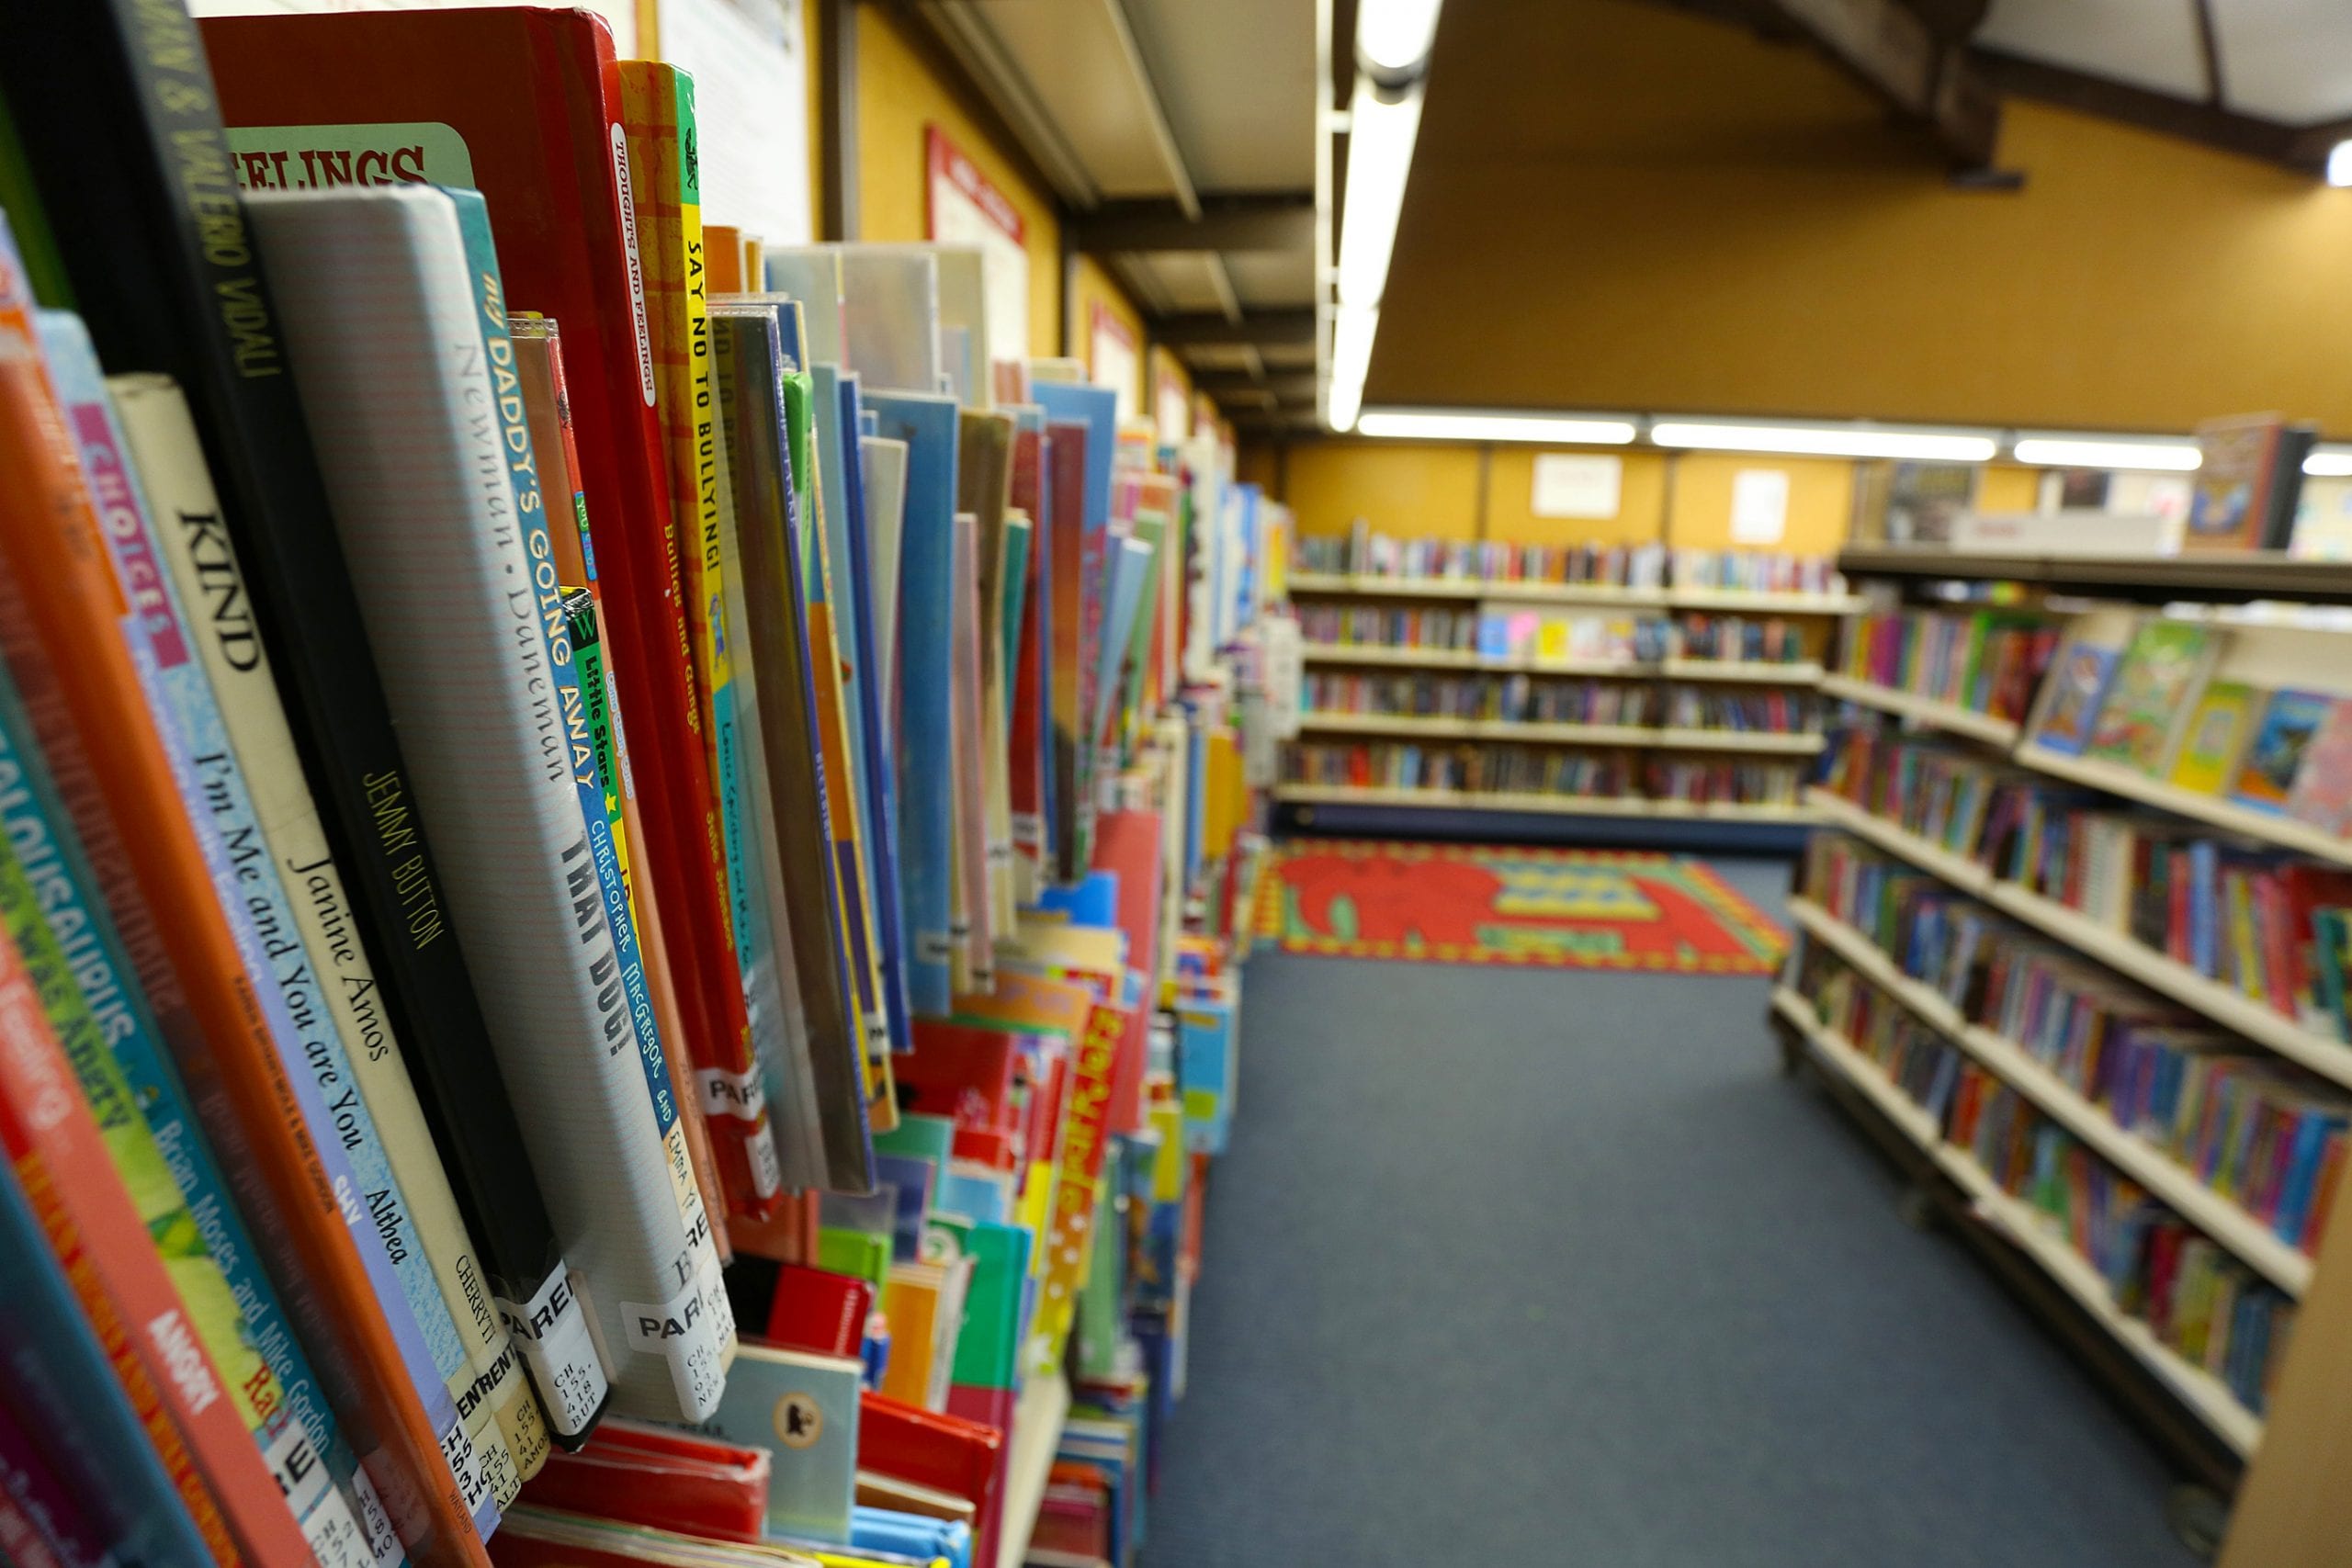 Council launches consultation on library services – Wokingham.Today